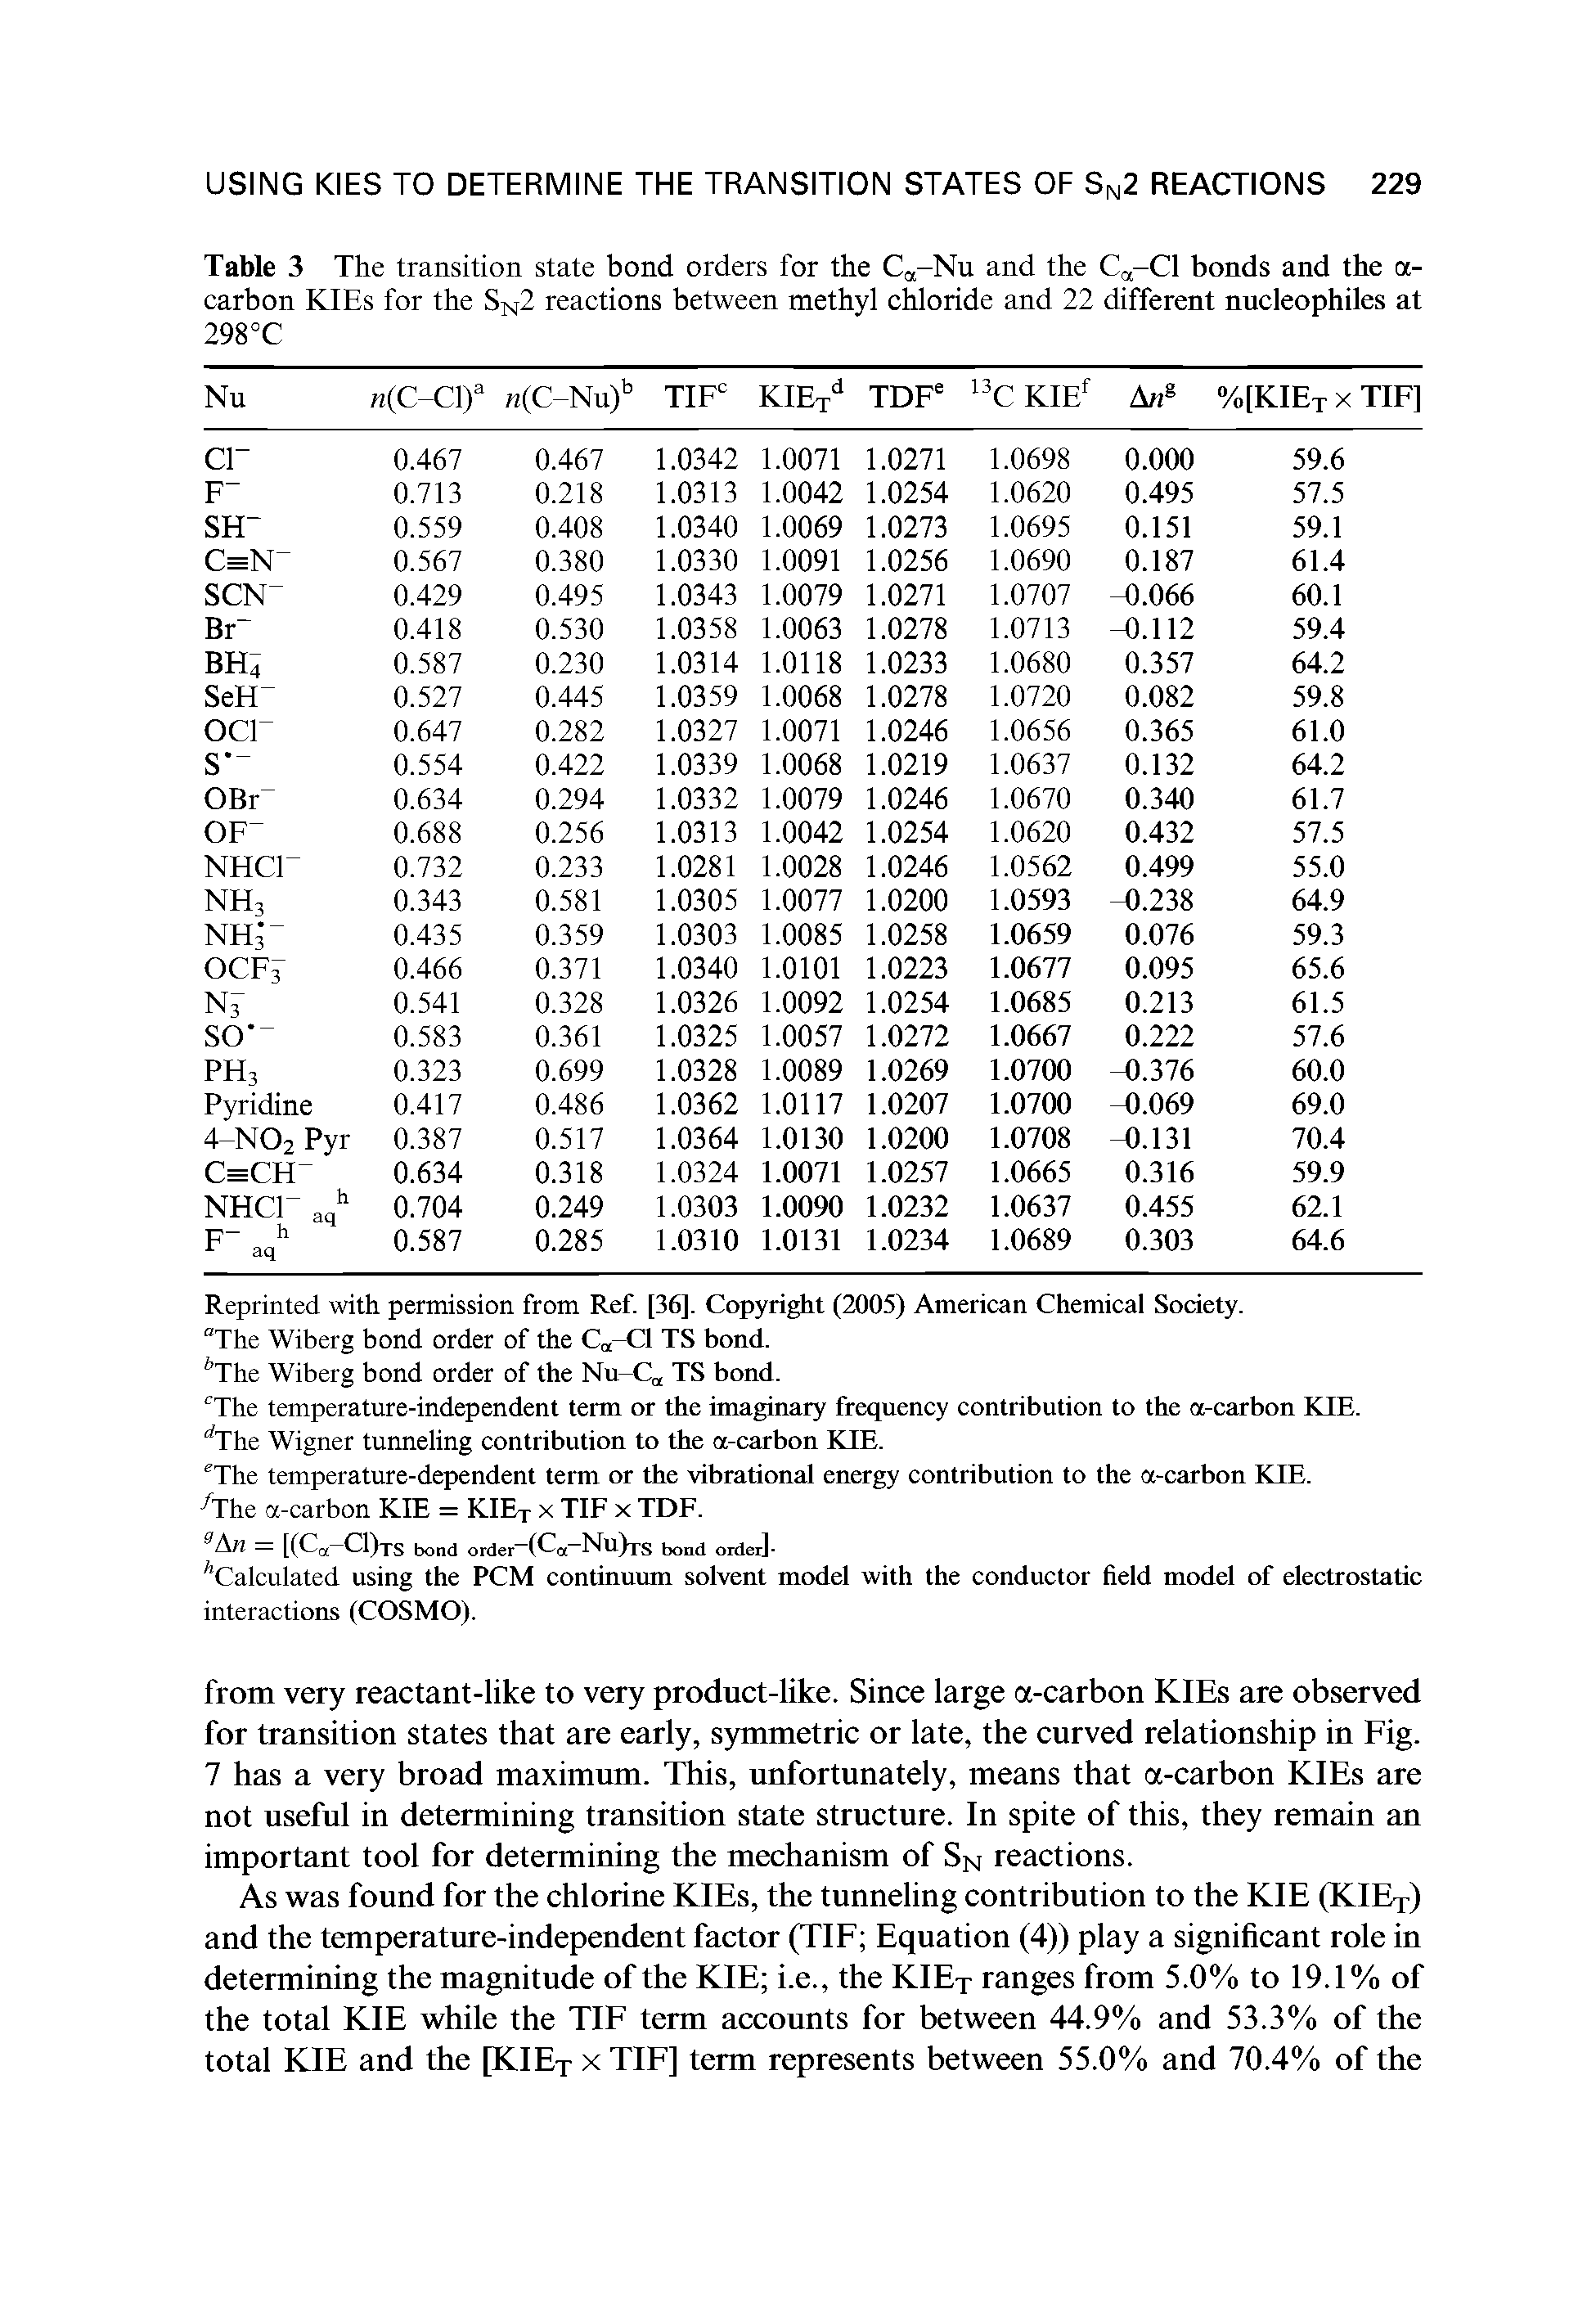 Table 3 The transition state bond orders for the Ca-Nu and the Ca-Cl bonds and the a-carbon KIEs for the SN2 reactions between methyl chloride and 22 different nucleophiles at 298°C...